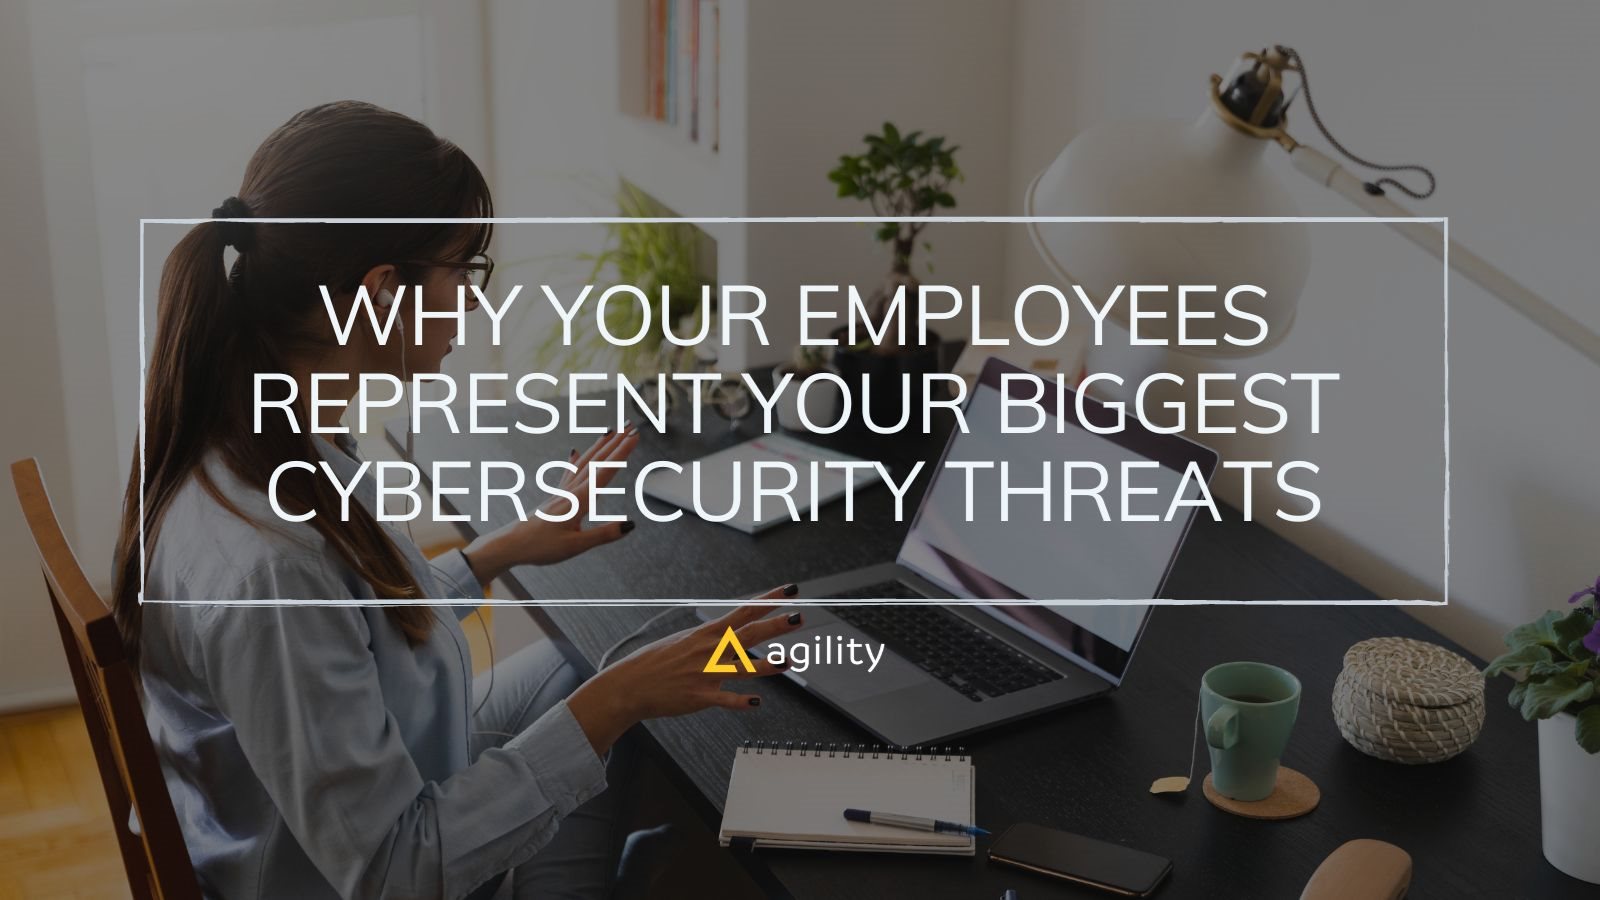 Why Your Employees Represent Your Biggest Cybersecurity Threats